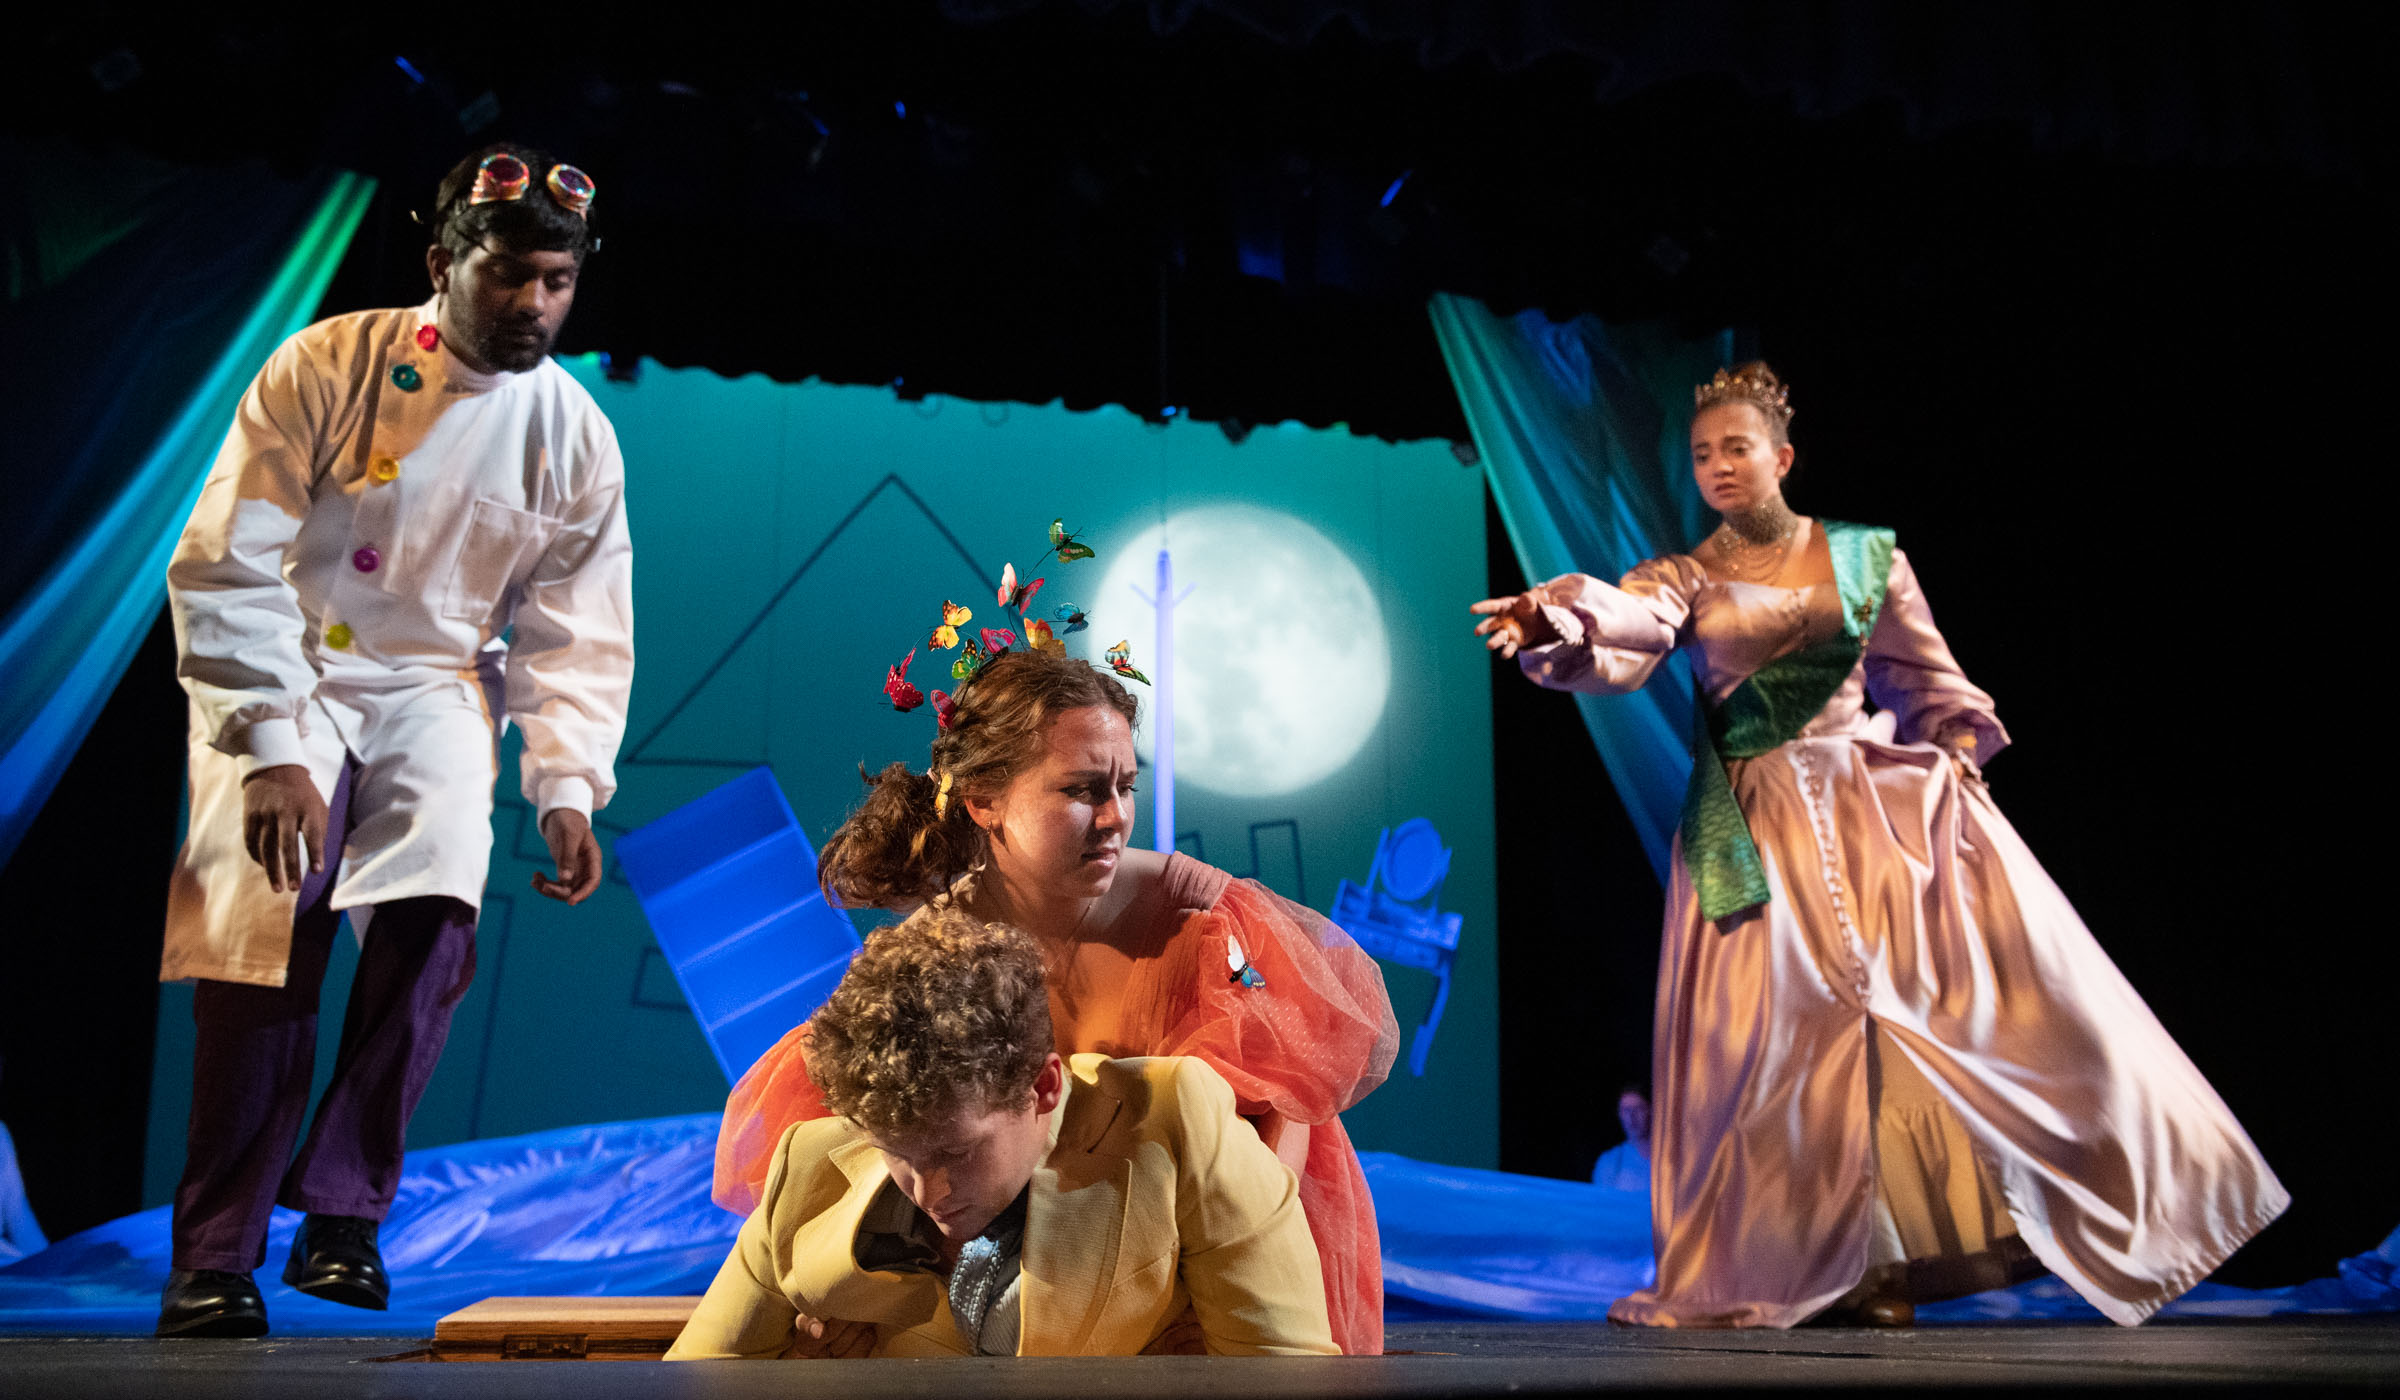 The actress playing The Light Princess pulls her beloved from below stage while two other characters react to the scene.